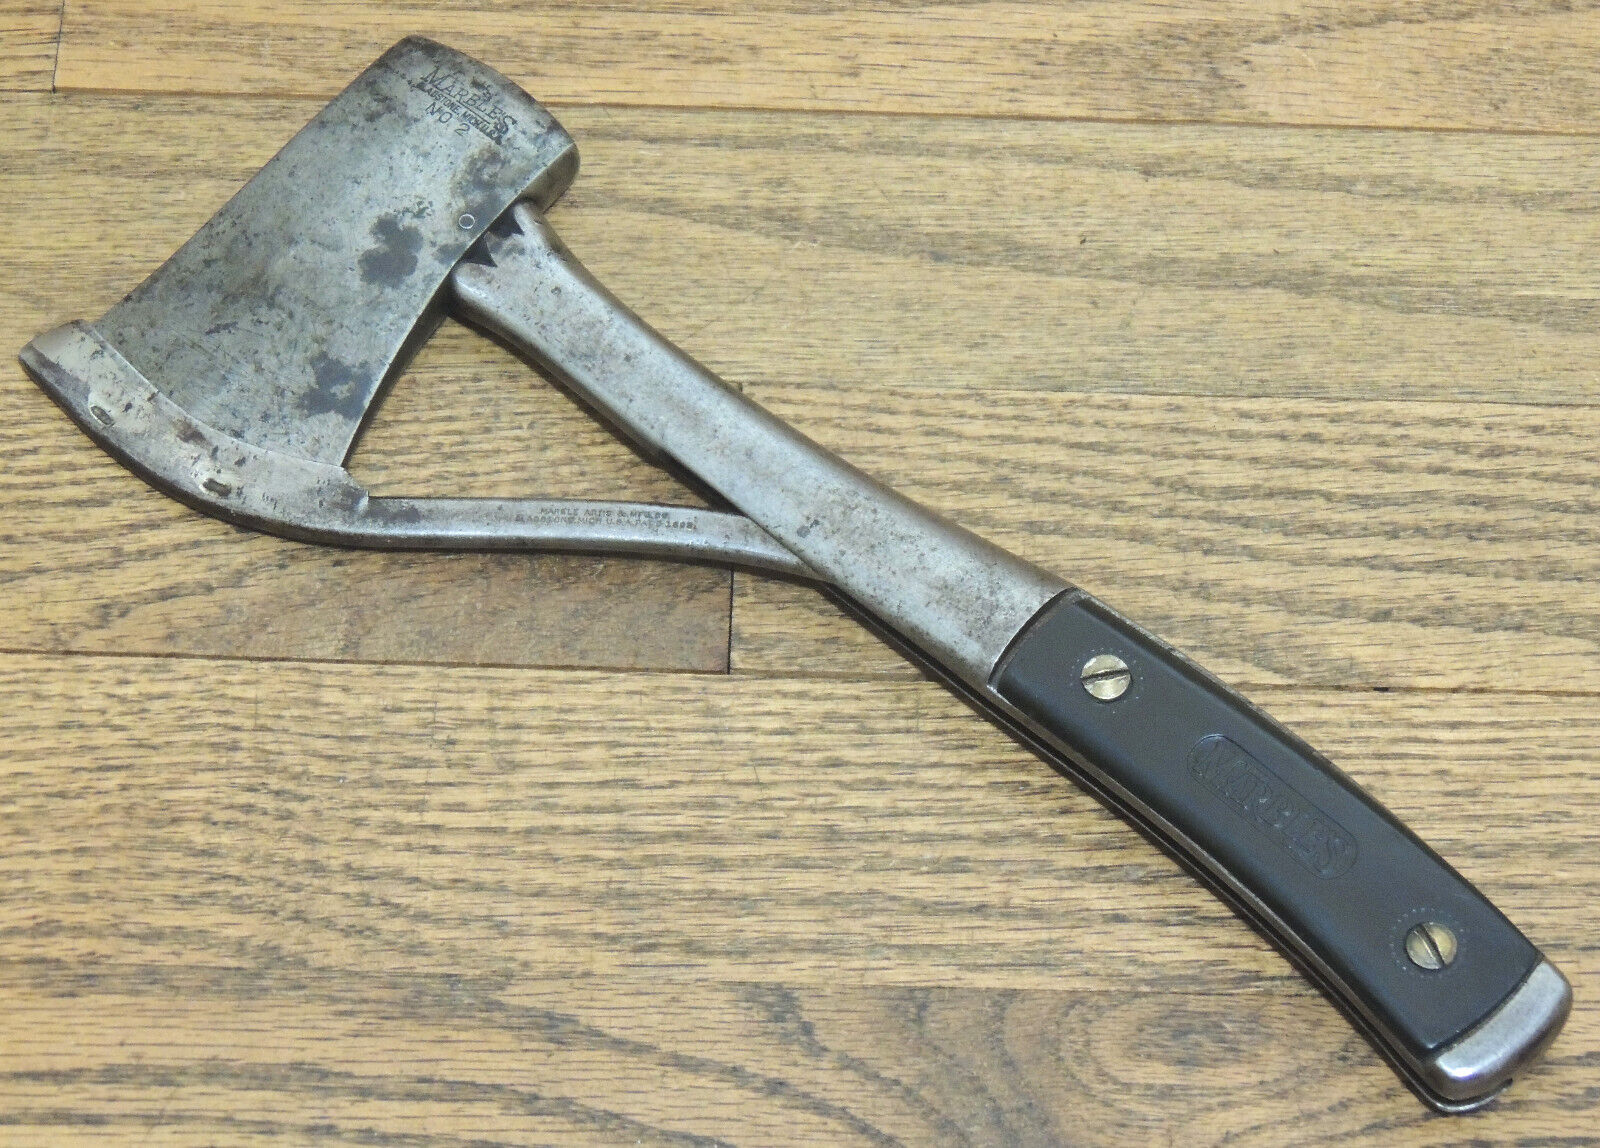 1898 MARBLE\'S GLADSTONE MI No. 2 SAFETY AXE w/GUARD-ANTIQUE HAND TOOL